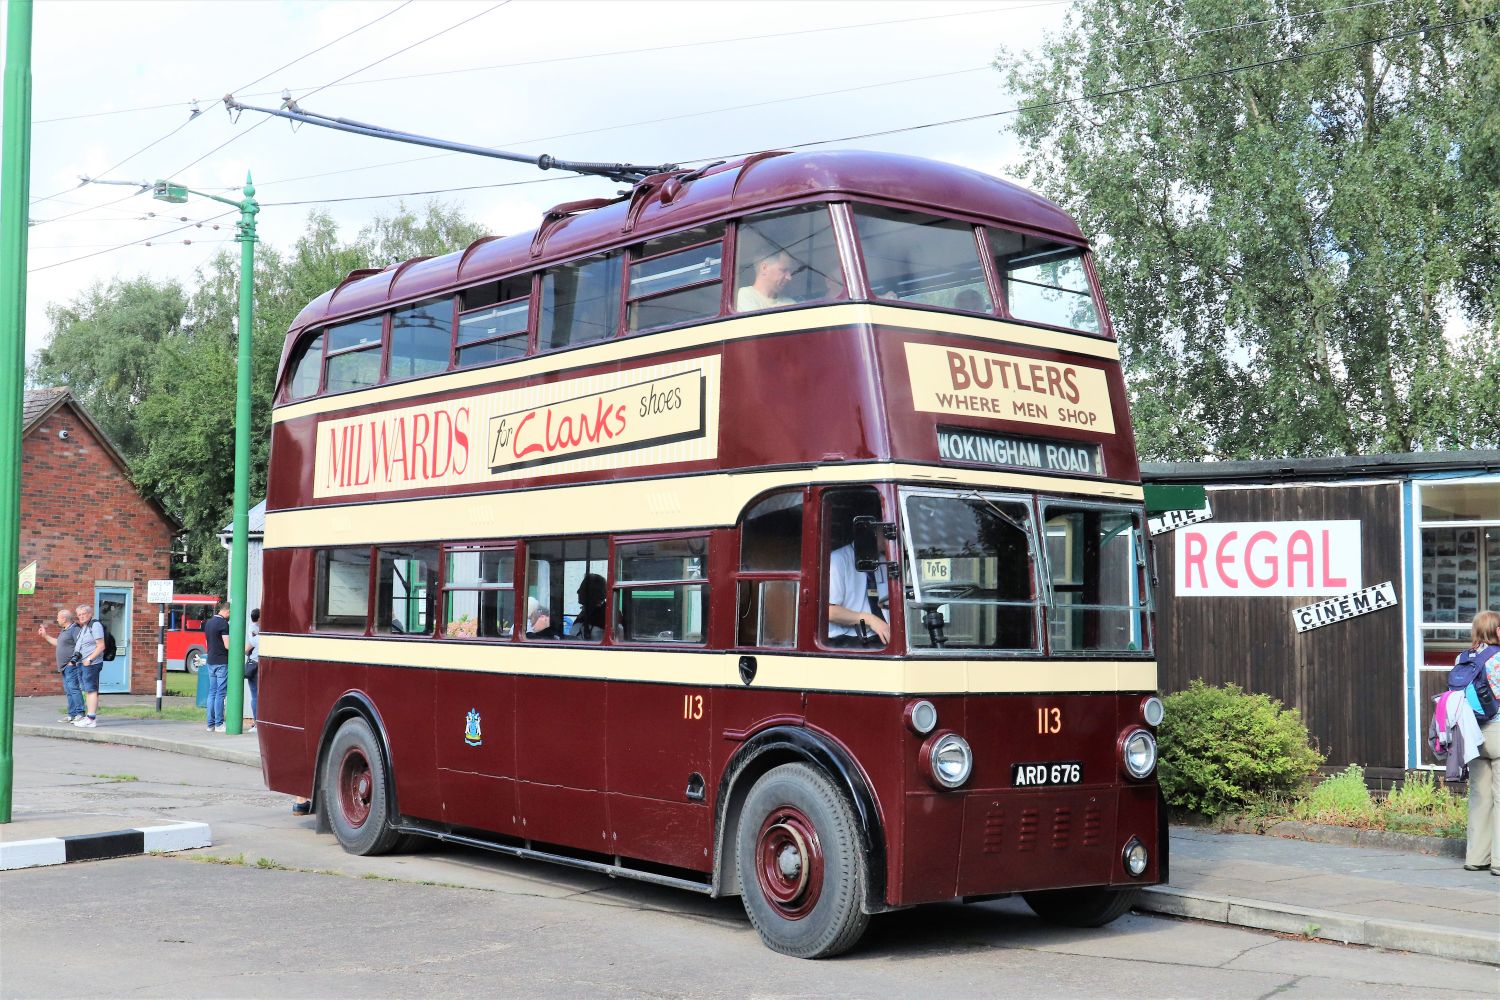 Originally purchased to replace trams, this Park Royal highbridge bodied AEC661T is said to have been the first trolleybus to be privately preserved and a significant vehicle in the history of trolleybus preservation. It served with Reading from 1939 to 1961